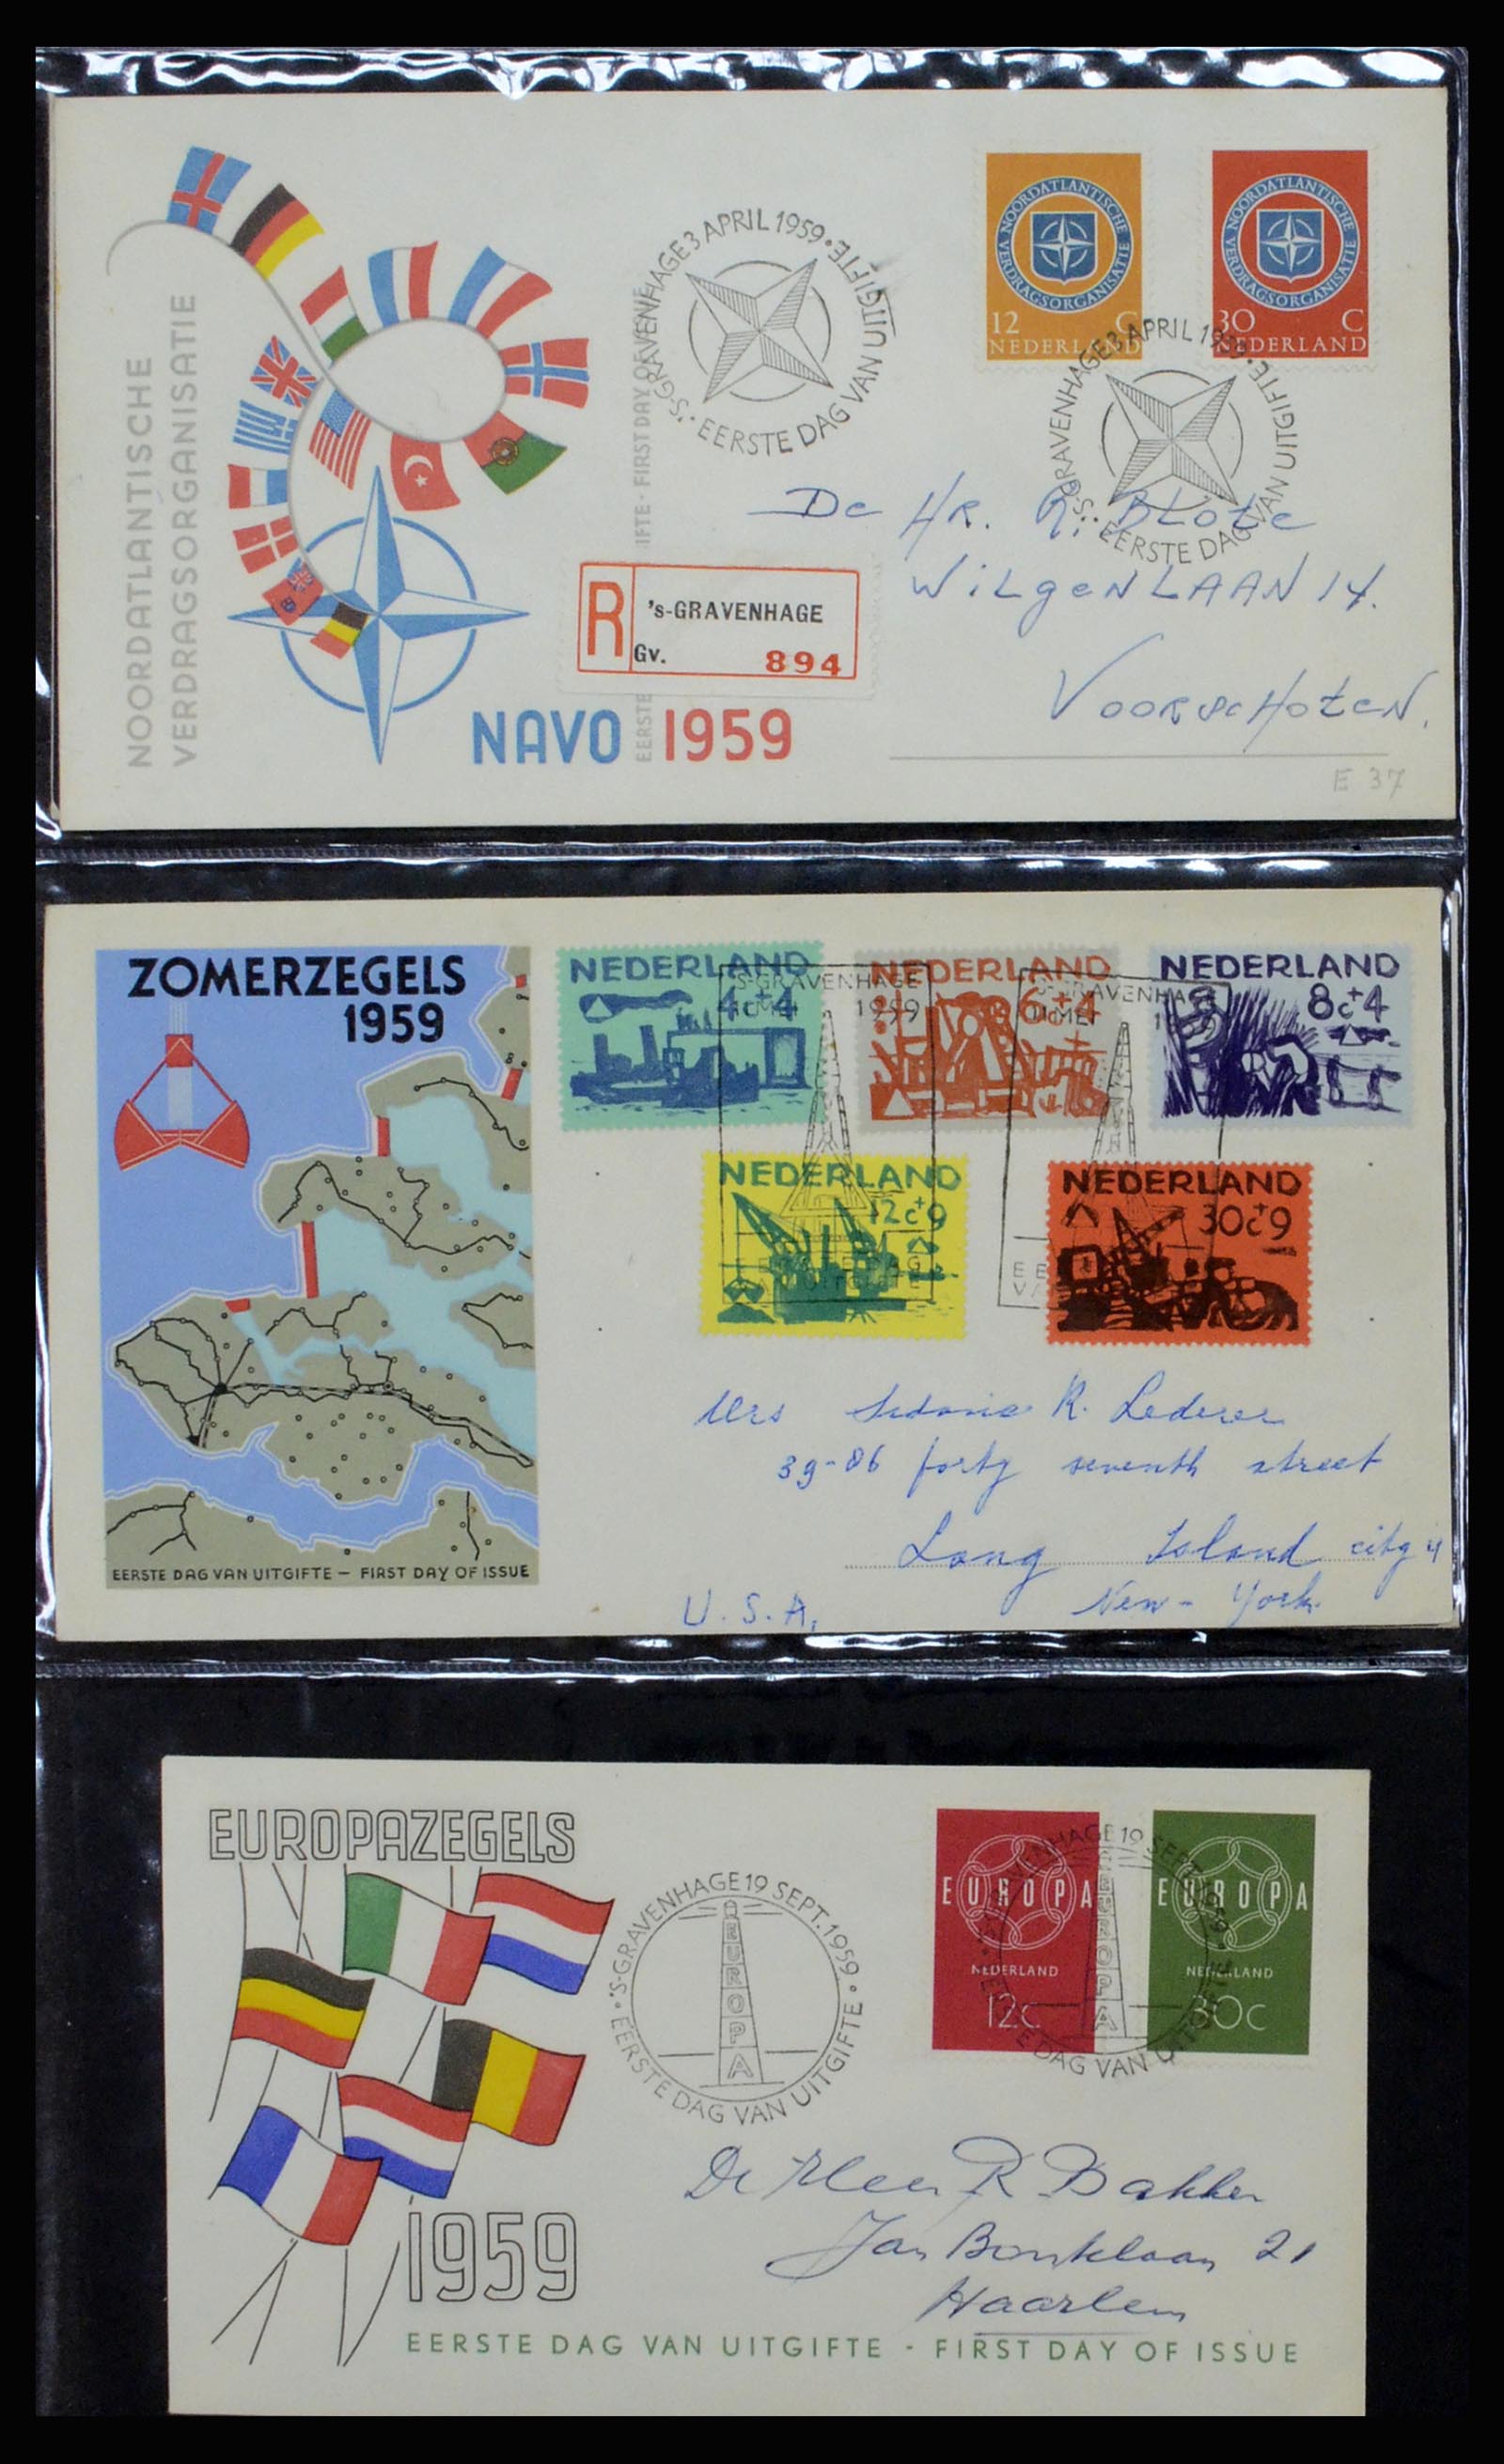 37197 014 - Stamp collection 37197 Netherlands FDC's 1950-2004.